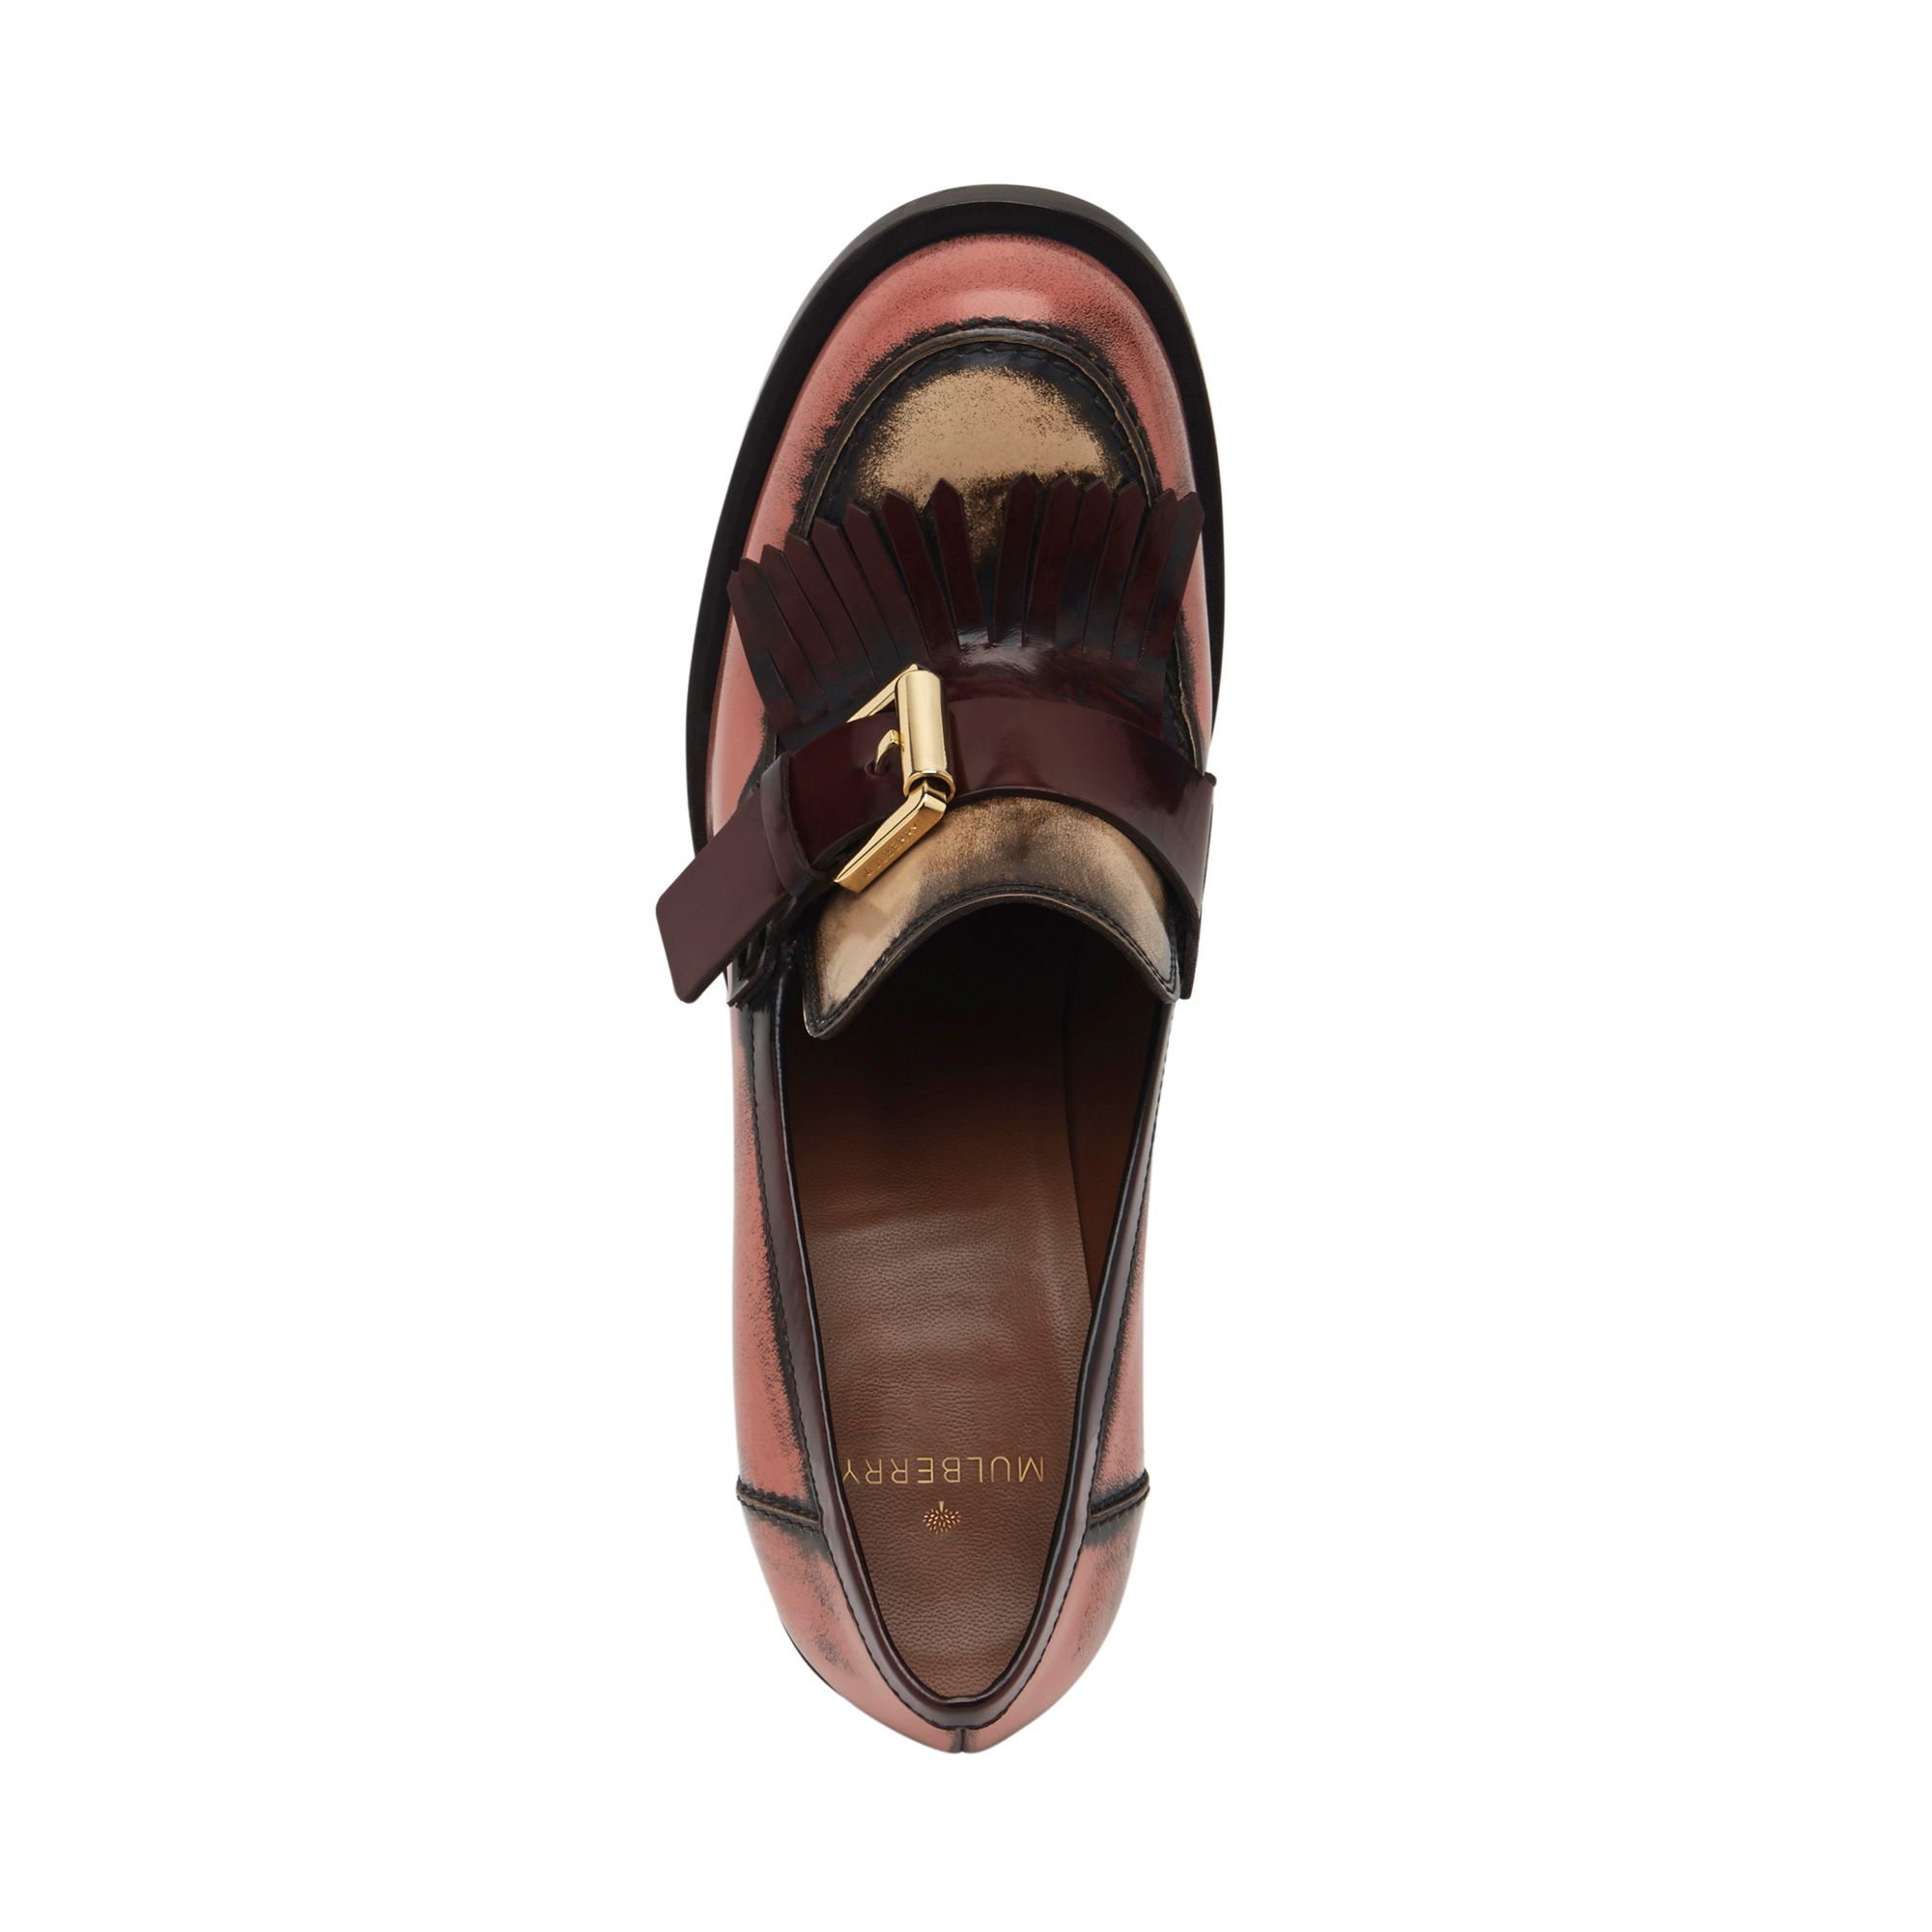 Mulberry Darby High Heel Loafer in Brown | Lyst